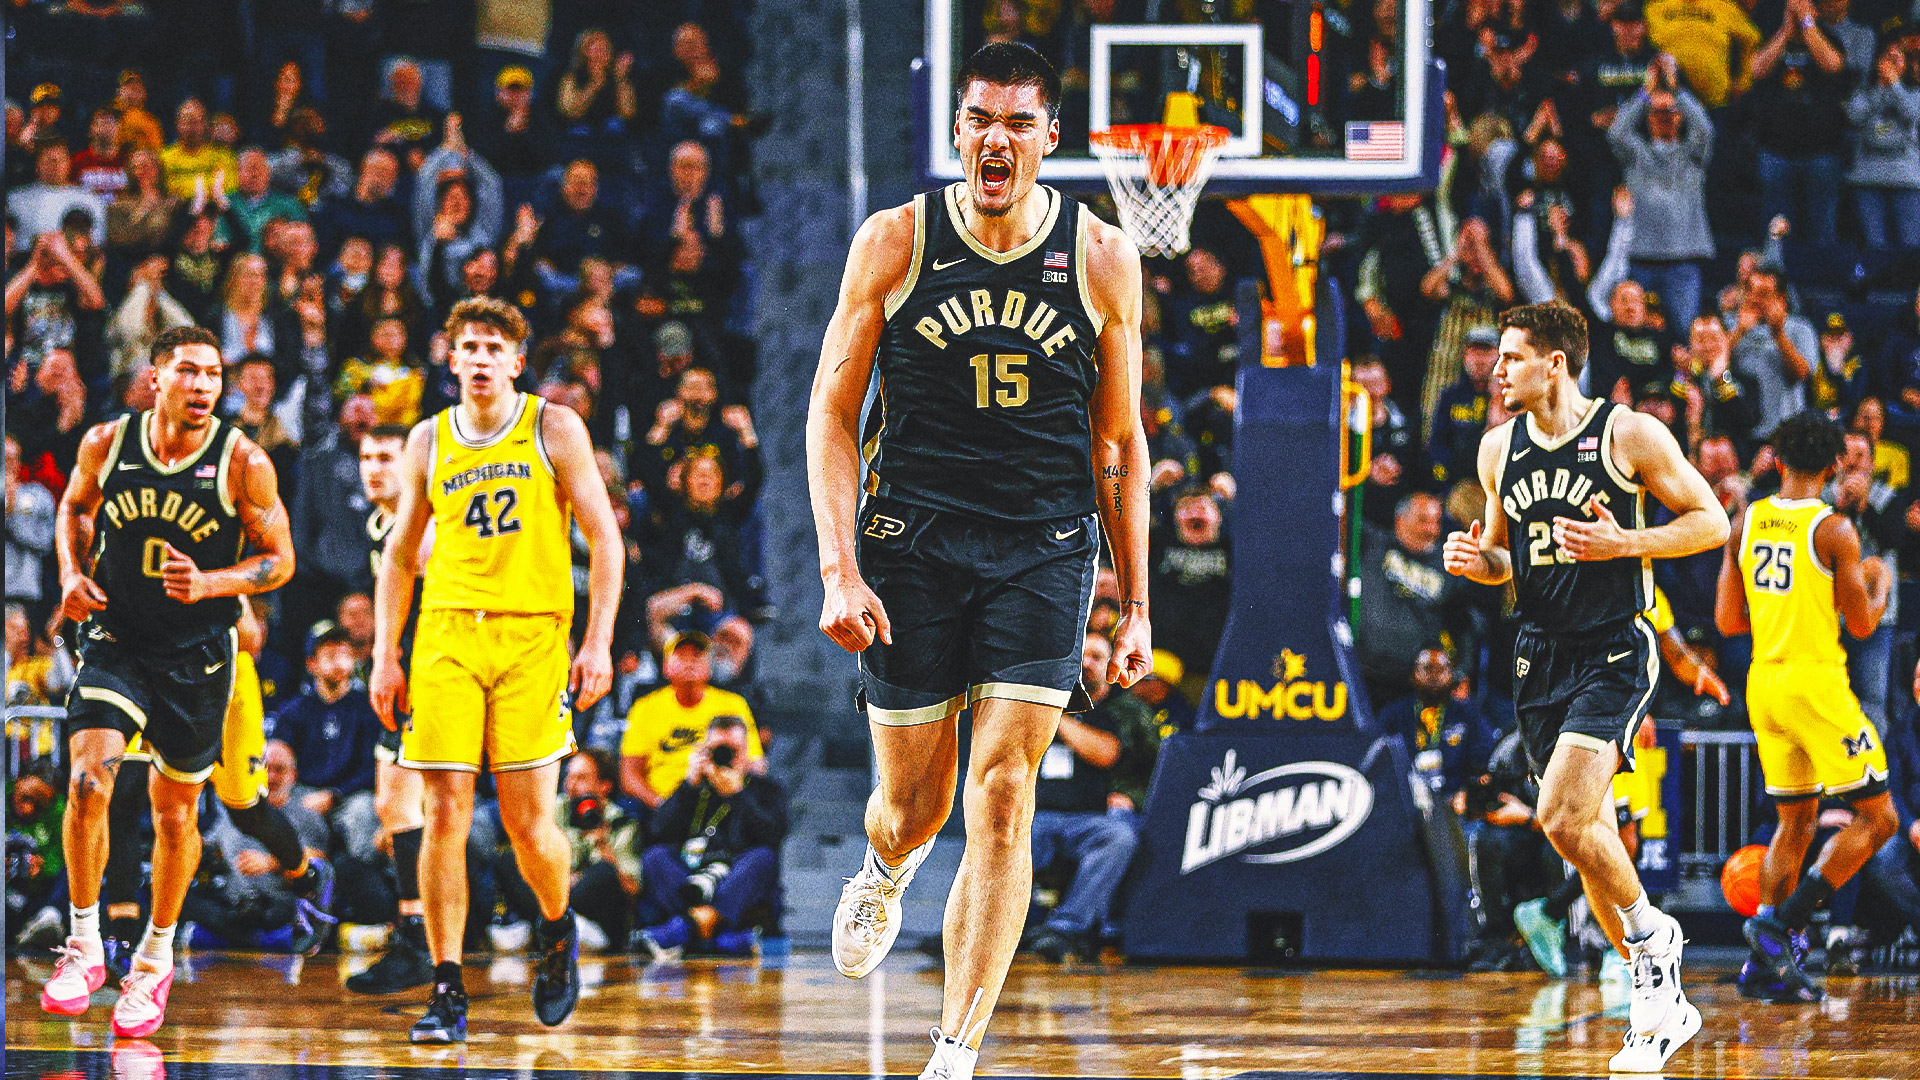 Zach Edey matches season high with 35 points, helps No. 3 Purdue beat Michigan 84-76